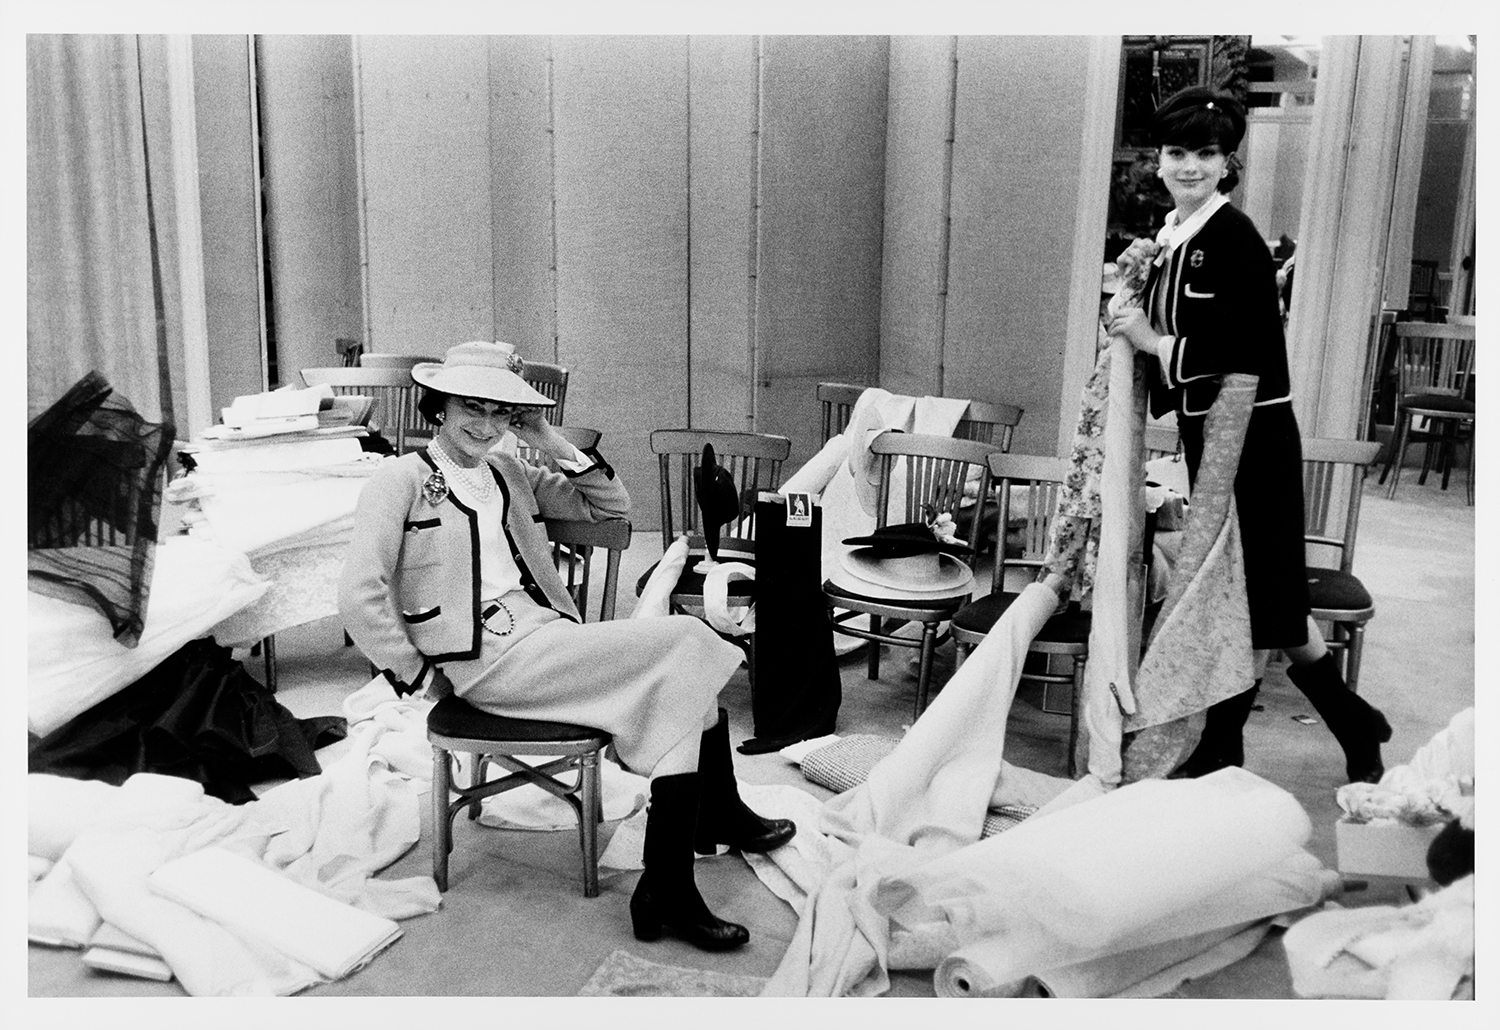 03_∏Coco-Chanel-and-Marie-HÇläne-Arnaud,-photographed-by-Willy-Rizzo---Paris-1959,-exhibited-at-the-Studio-Willy-Rizzo_LD